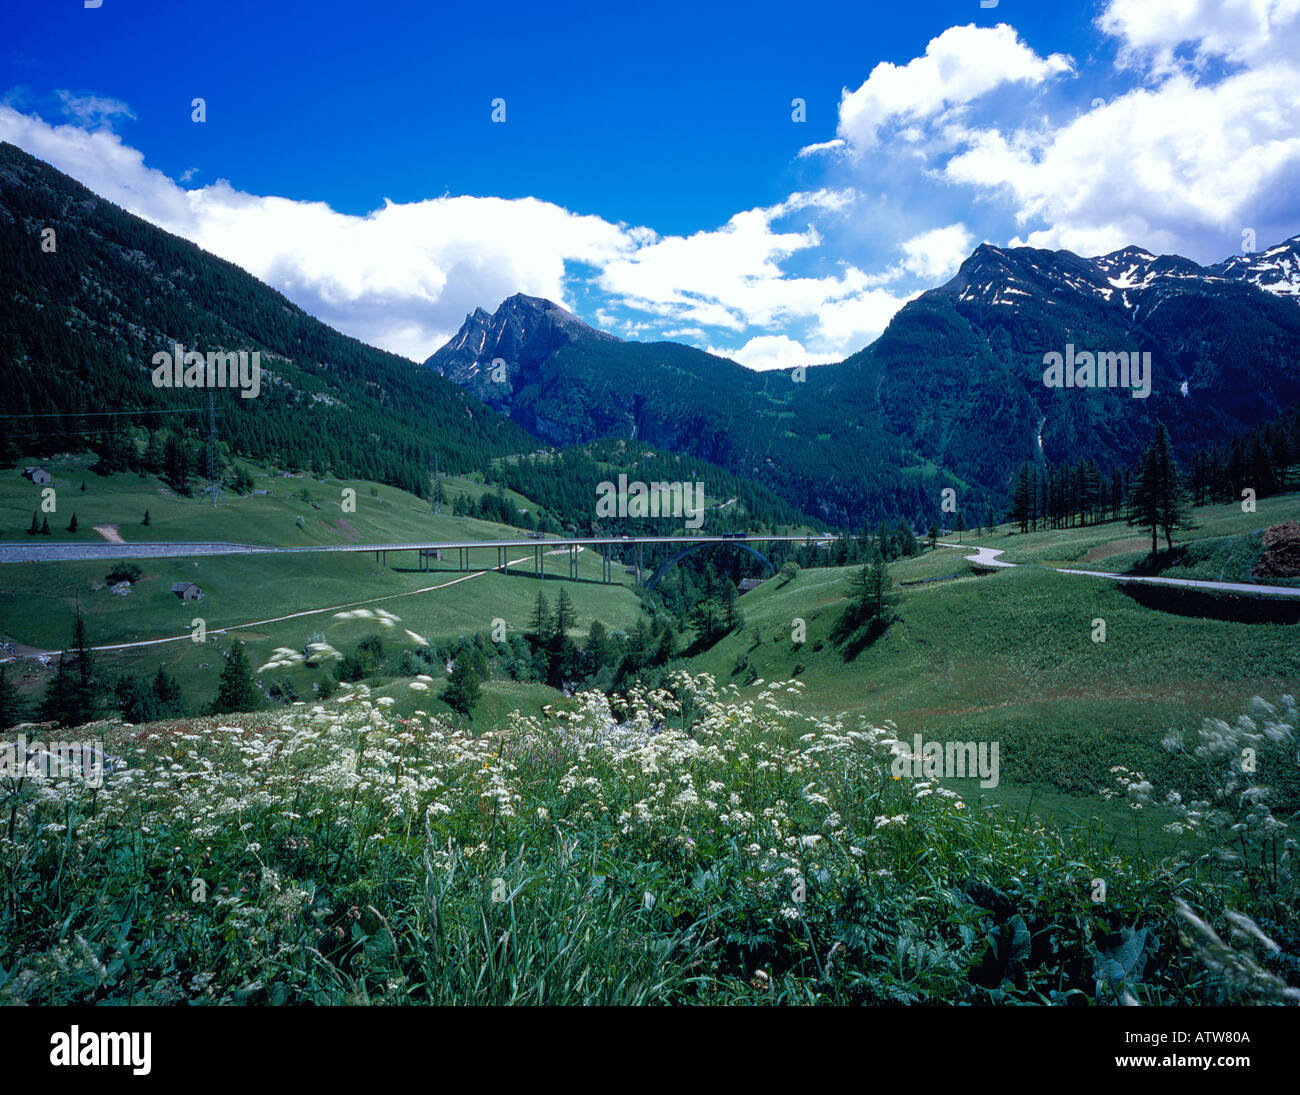 Switzerland mountains at the summit of Simplon Pass view from the village Simplon looking south Europe. Photo by Willy Matheisl Stock Photo